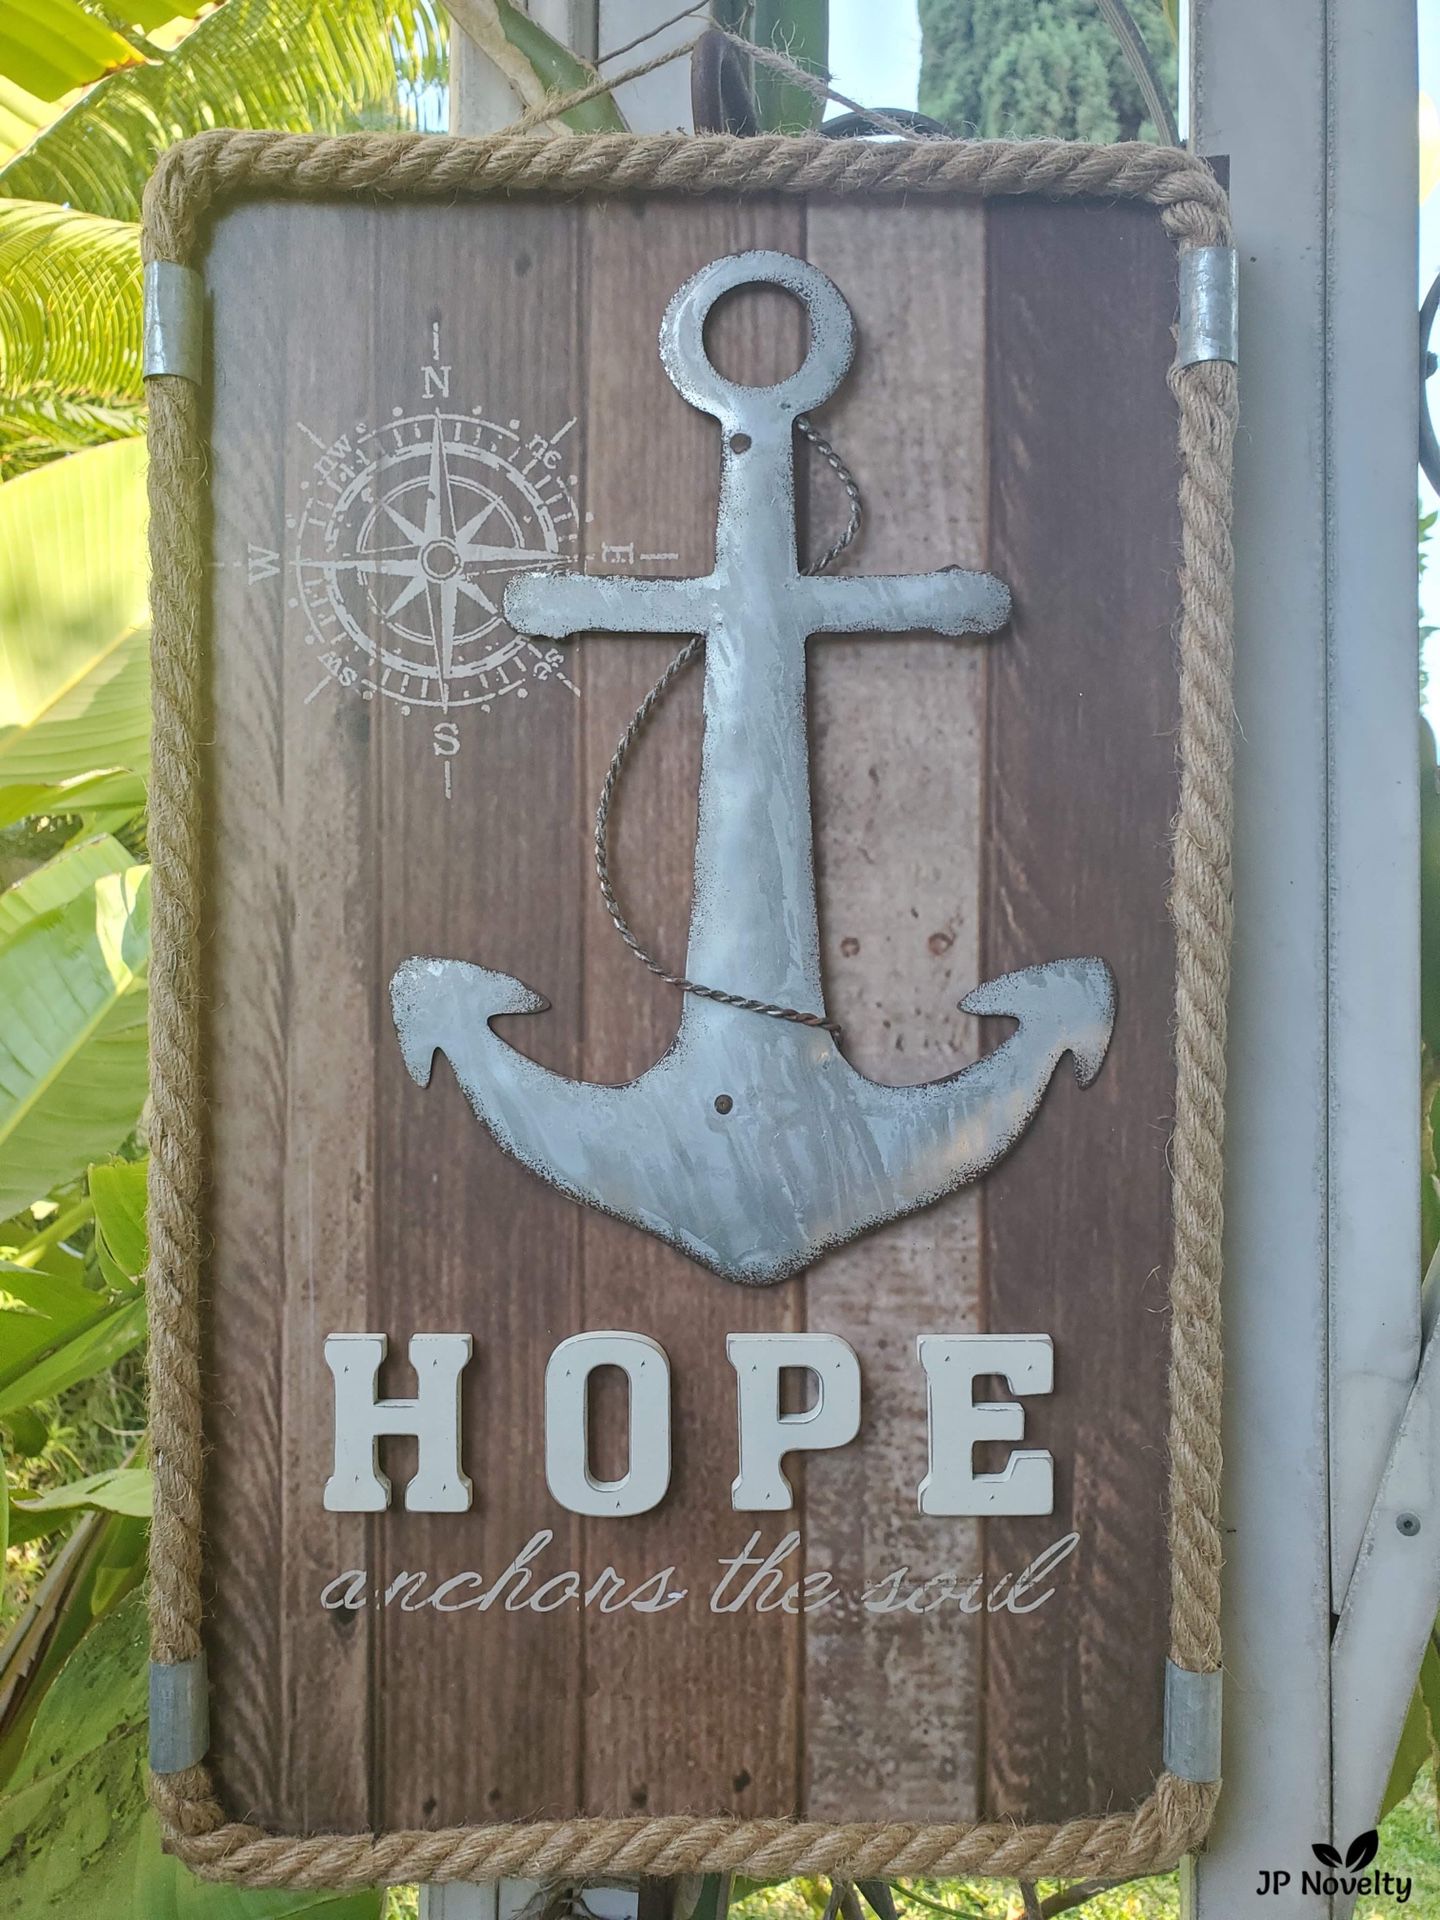 NEW-Large Metal Anchors The Soul - Wall Decor